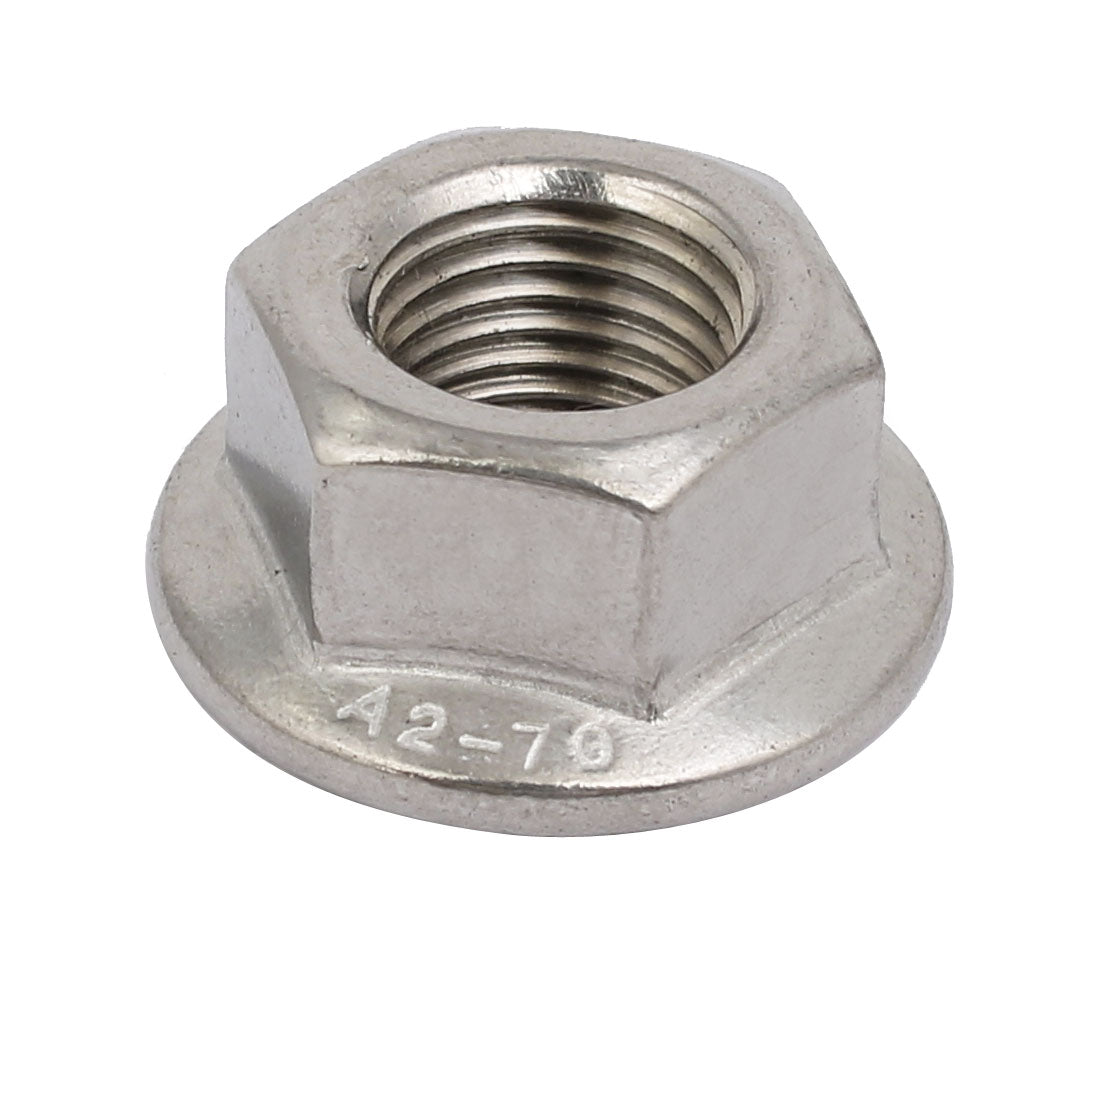 uxcell Uxcell 12pcs M12 x 1.25mm Pitch Metric Fine Thread 304 Stainless Steel Hex Flange Nut